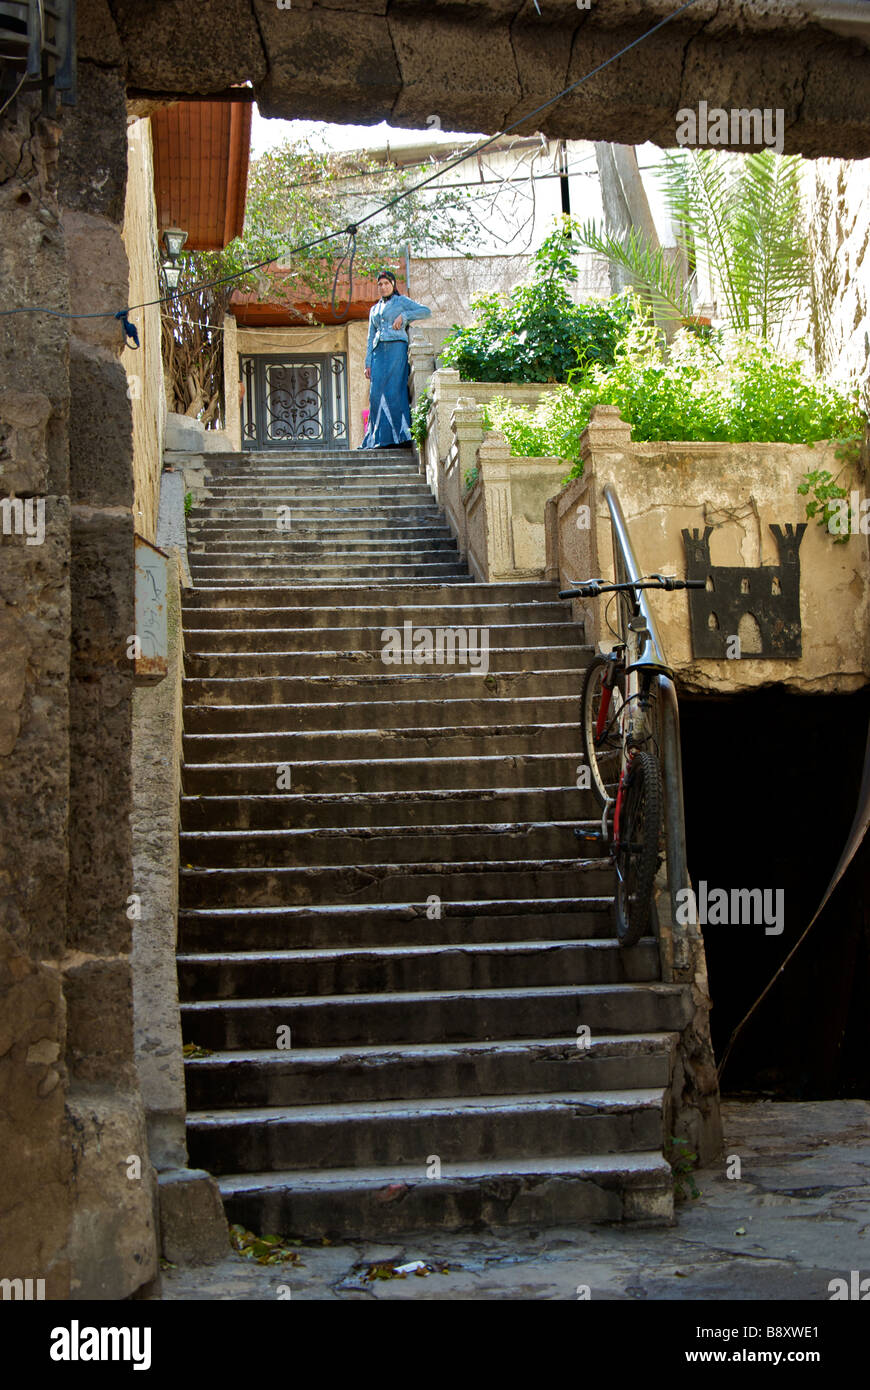 Arab Israeli woman at top of stairs in residential neighbourhood inside former Templar Knight fortress port city Akko Stock Photo